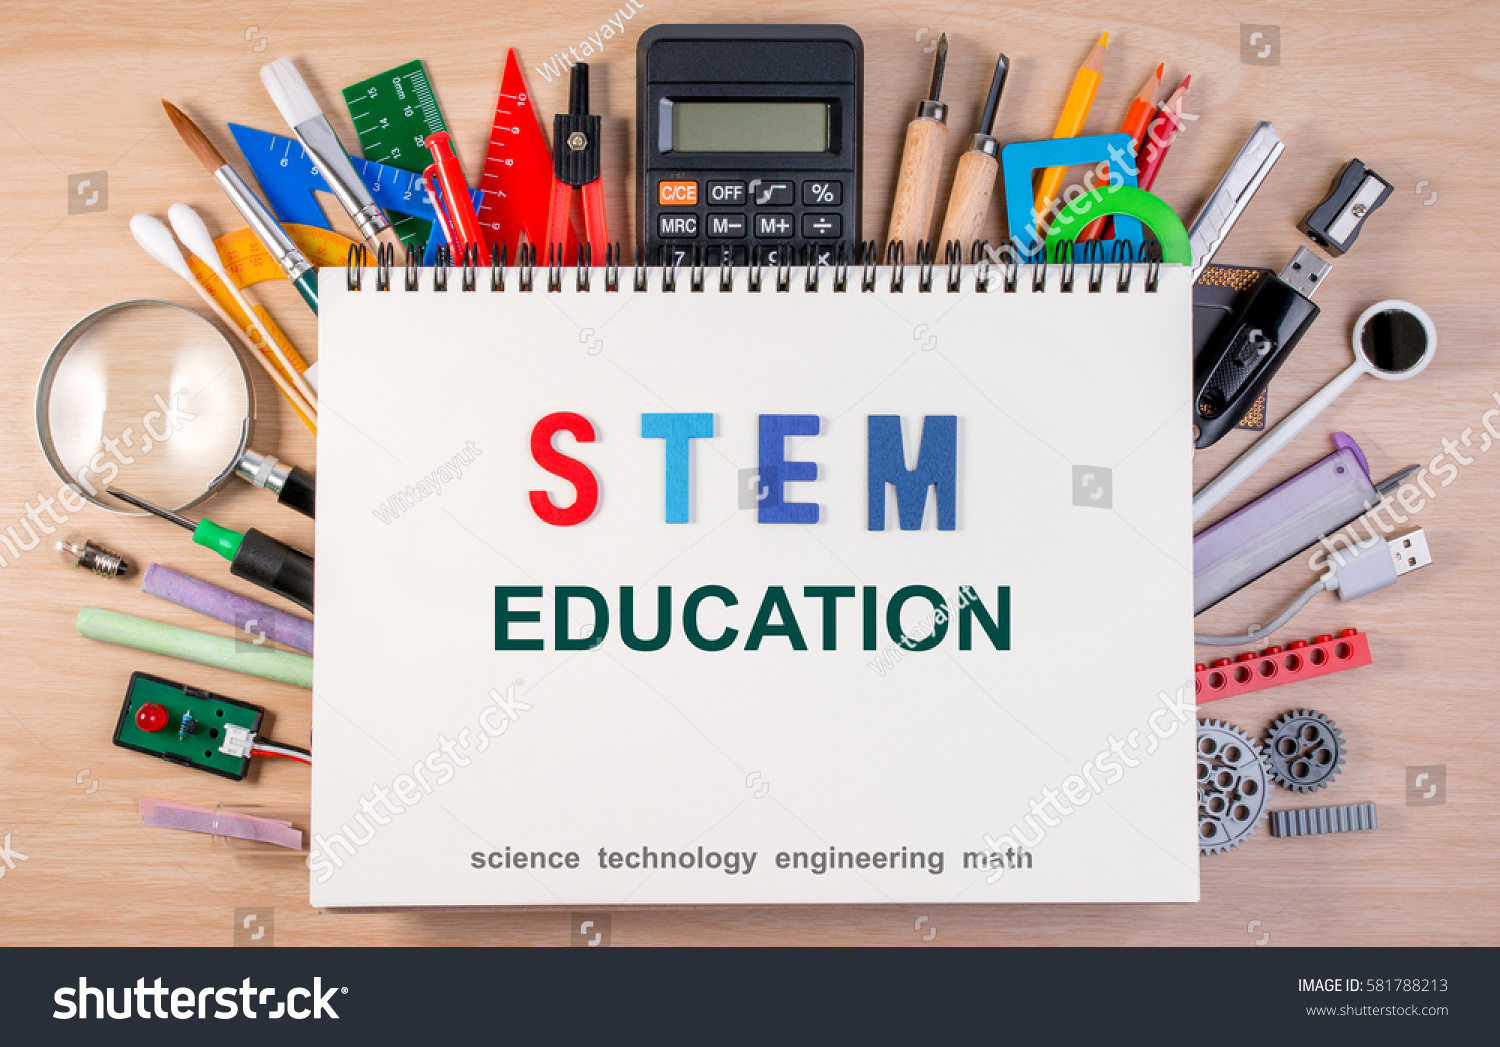 STEM education text on notebook over school supplies or office supplies on school table. Background with school or office material with copy space for text. #581788213